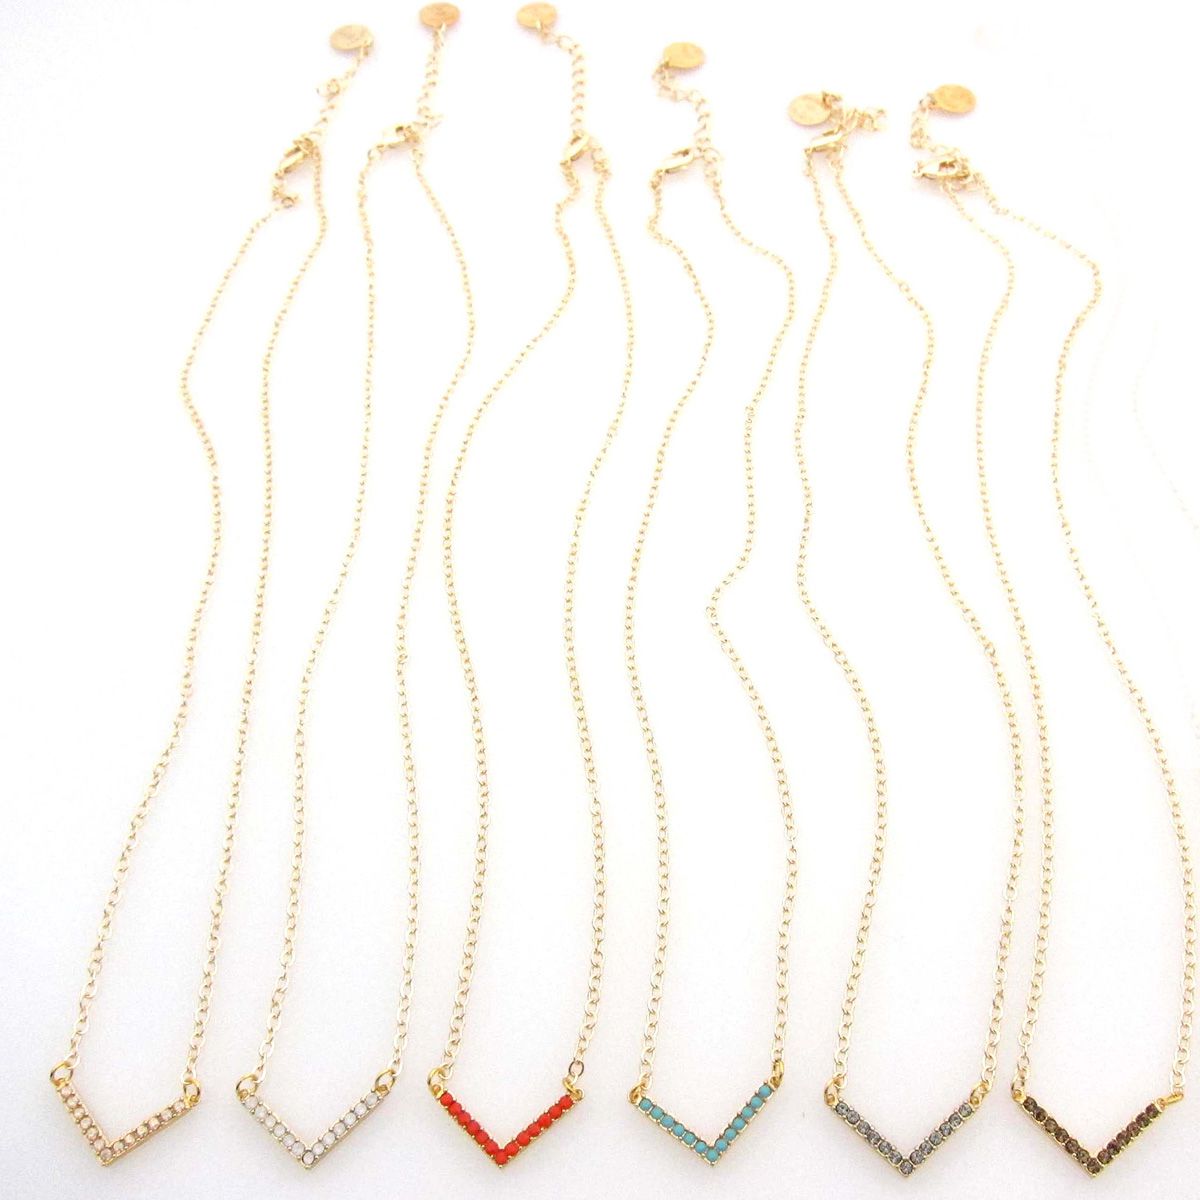 Dainty necklaces to mix and match by Jessica Elliot